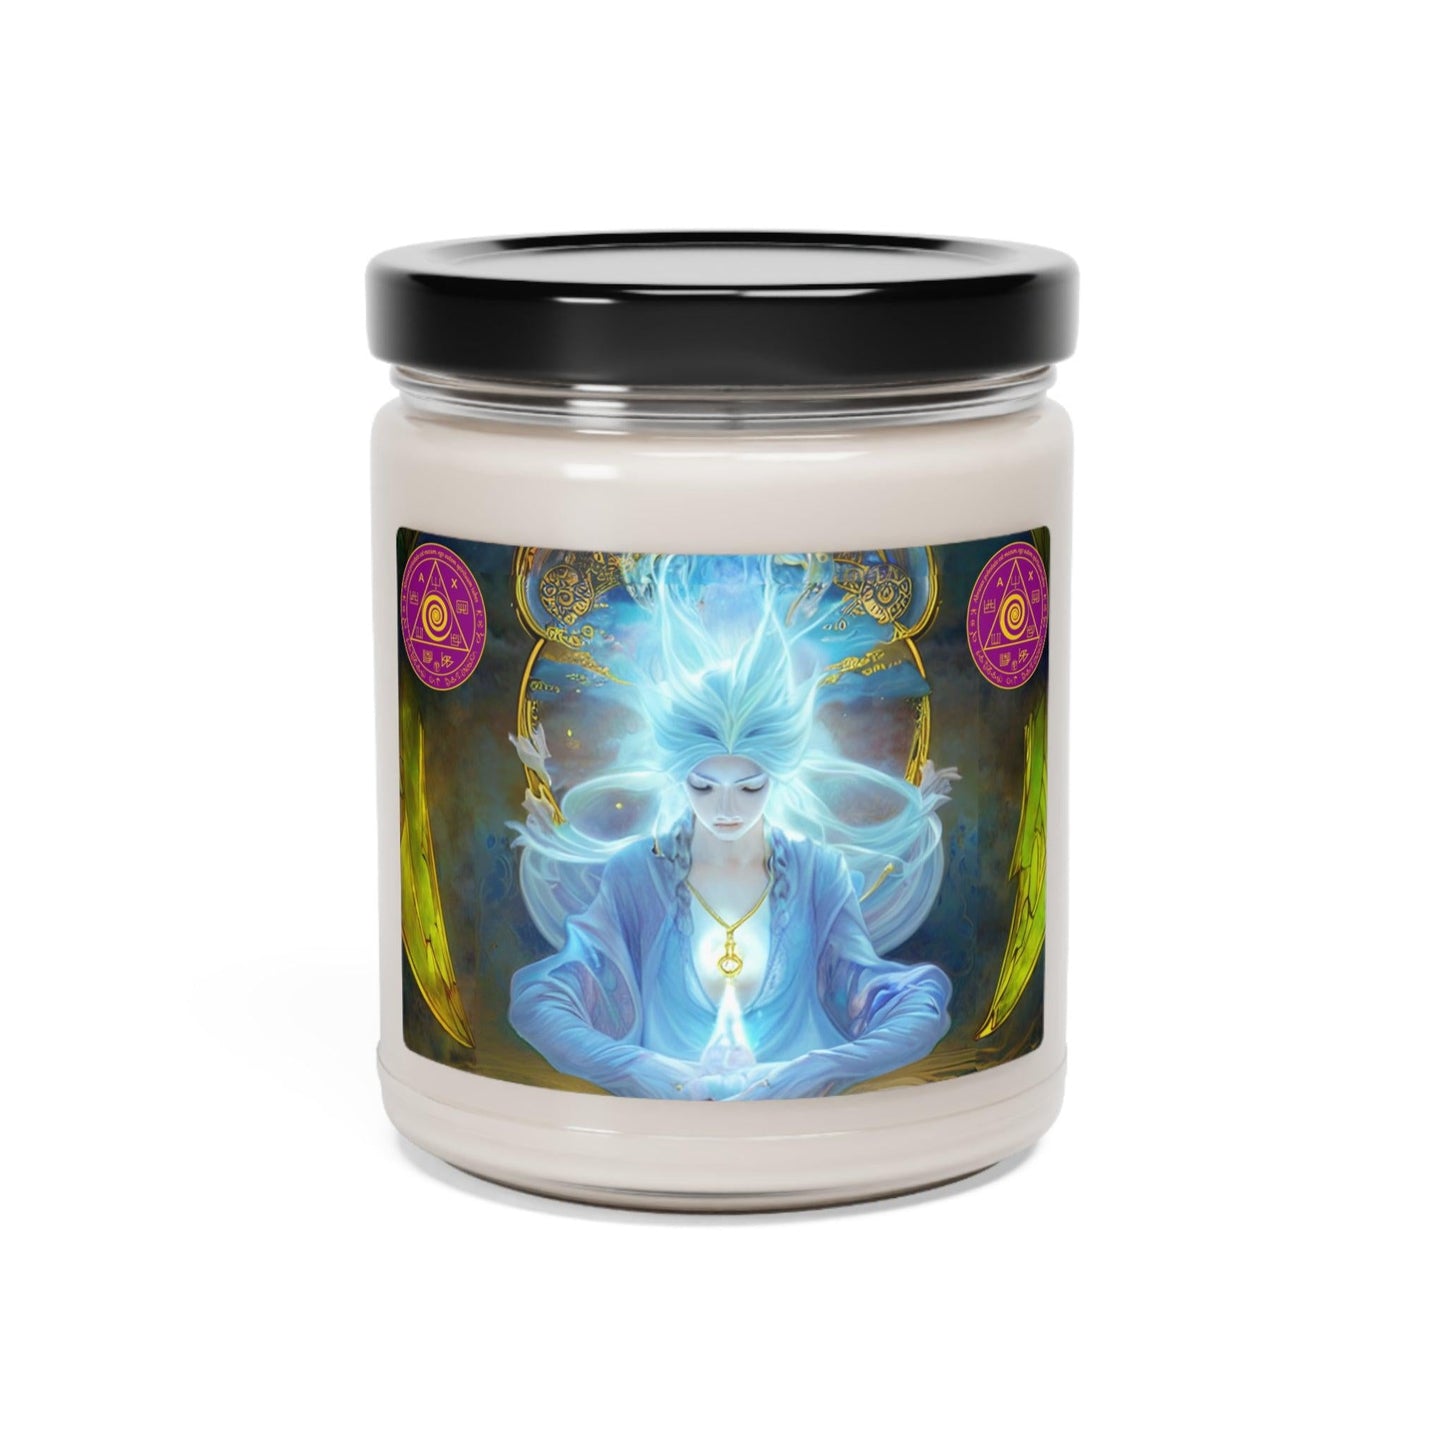 Olympic-Spirits-Cleansing-and-Protection-Scented-Soy-Candle-for-offerings-risuals-initiations-or-praying-and-meditation